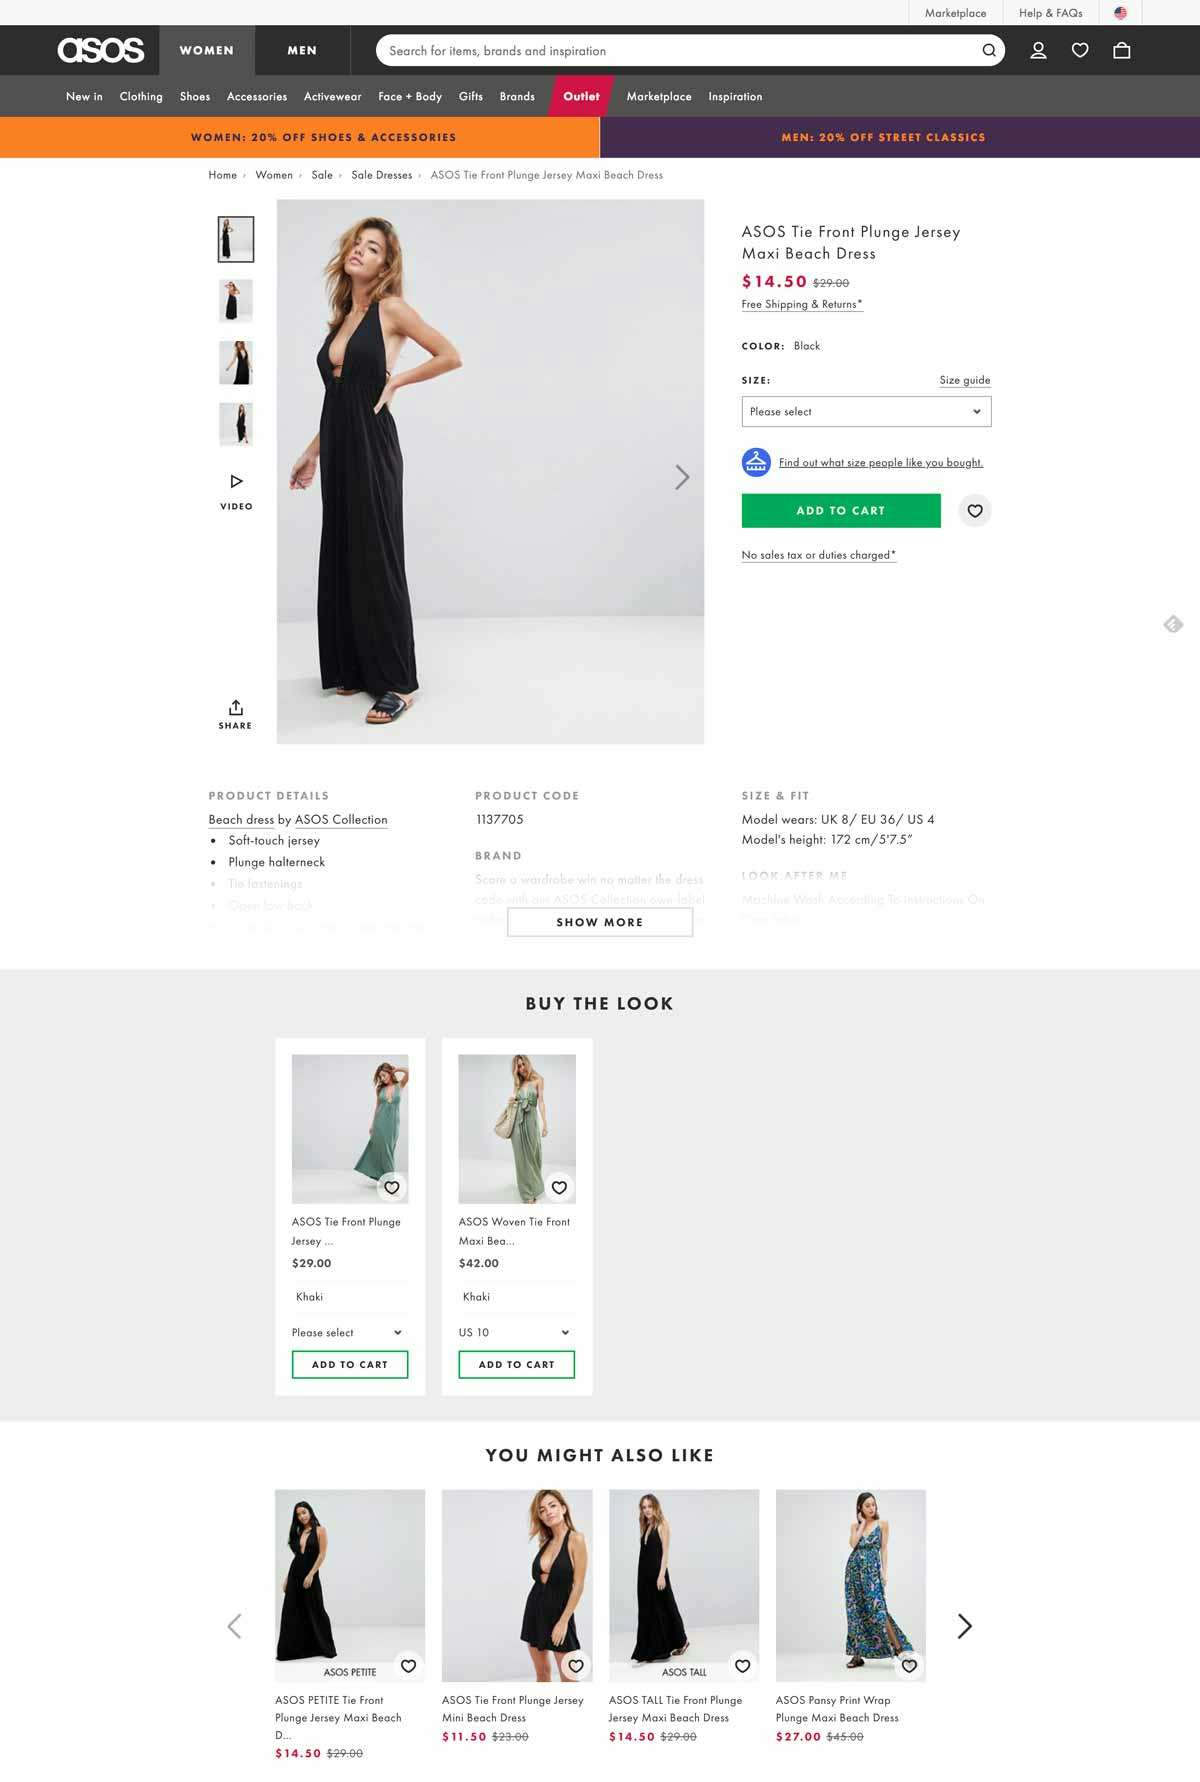 The same cross-sell tactic you use on a product page you should use on a 'Thank You' page (ASOS)